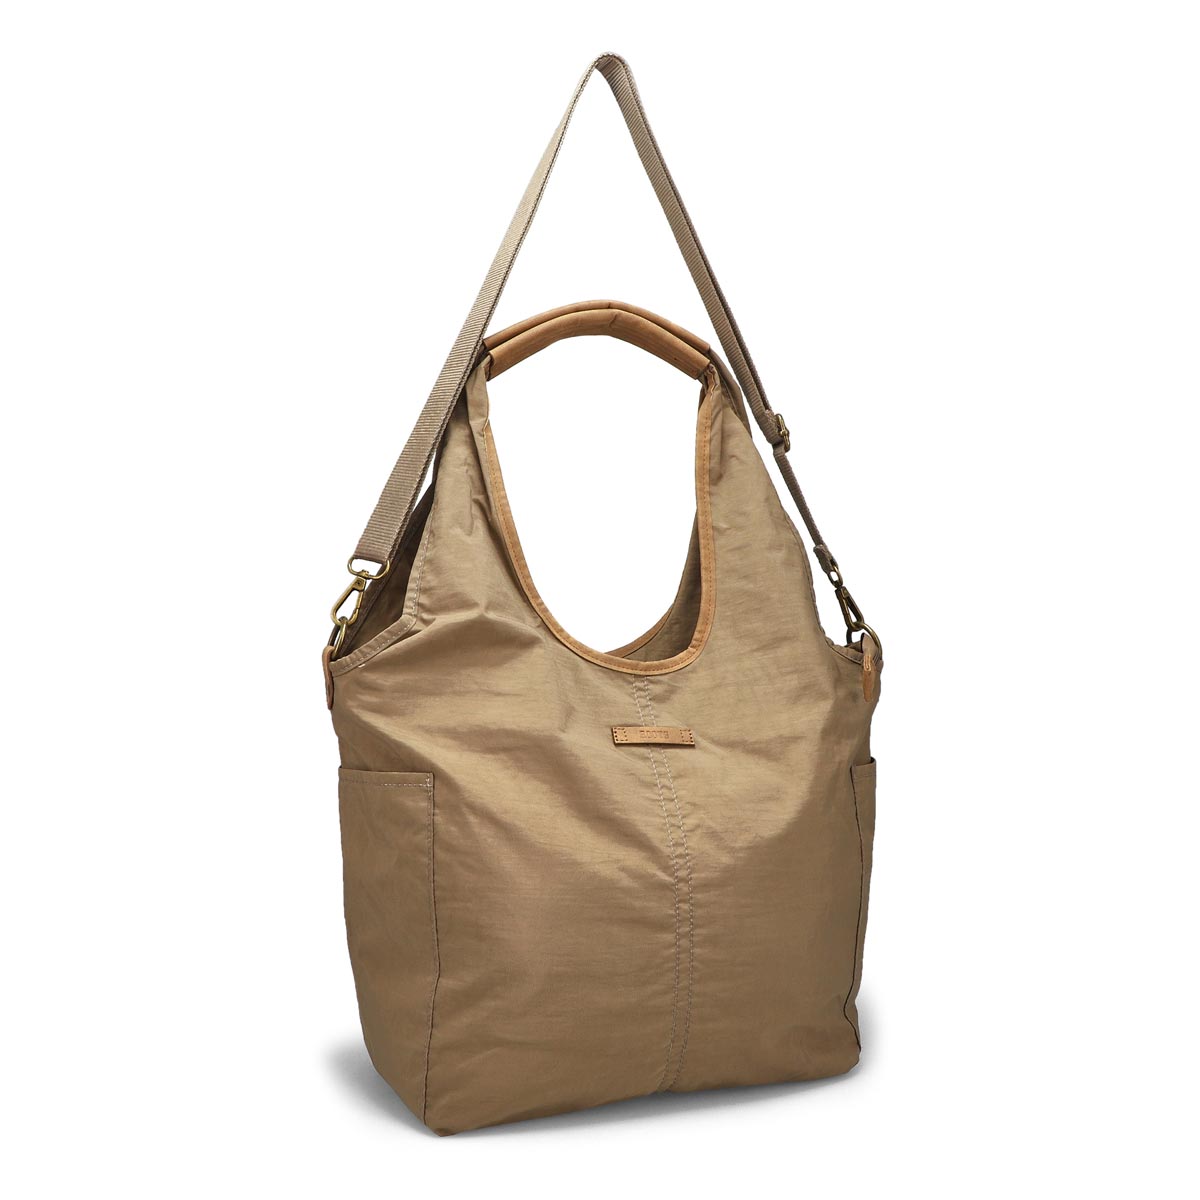 Sac besace R5892 CAMI HOBO, taupe, femmes